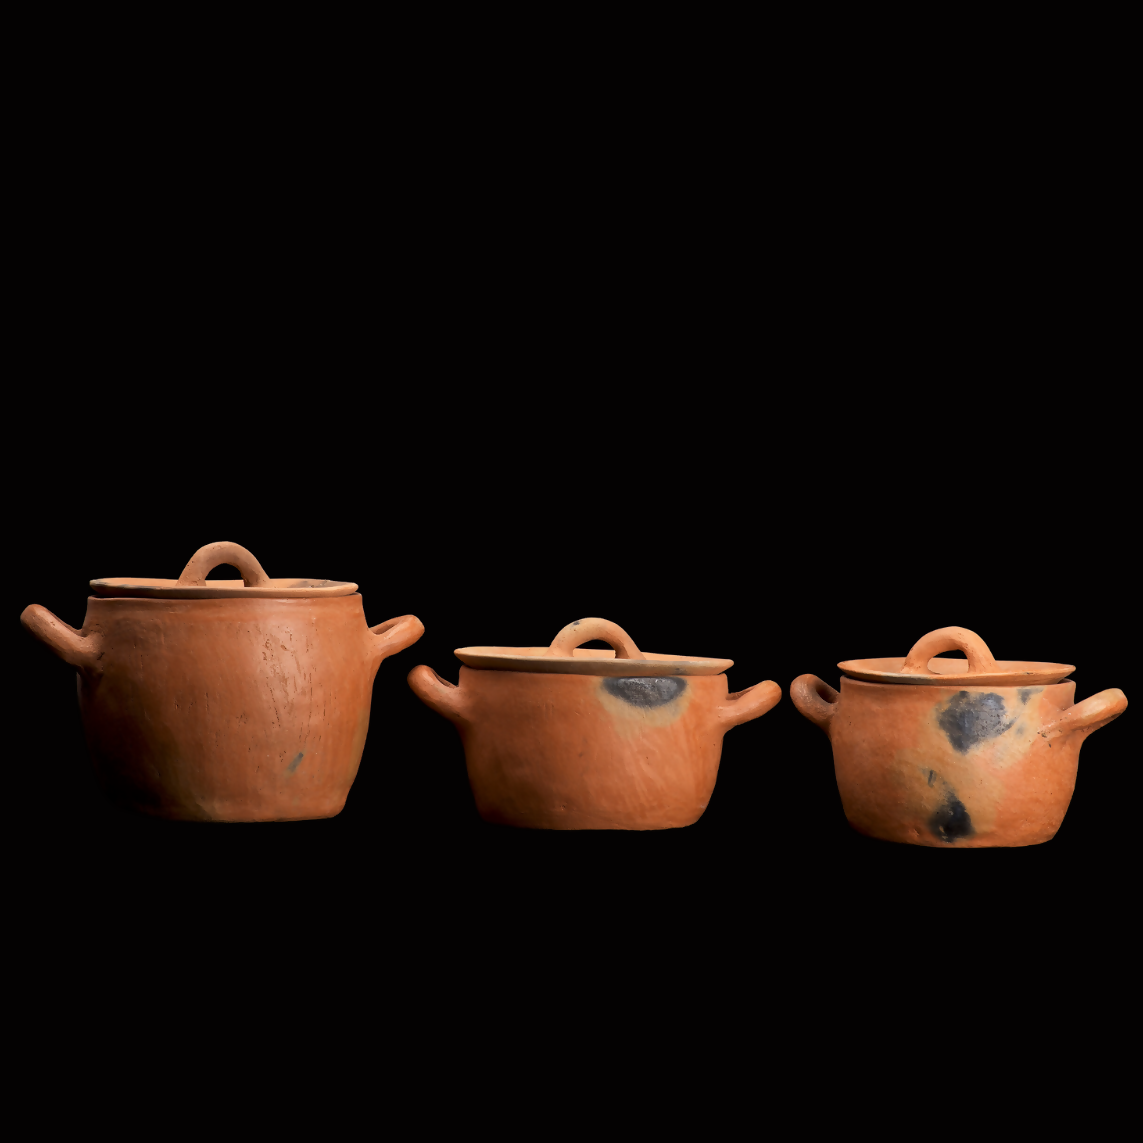 Mixe Sierra 3-pot Set: Artisanal Covered Earthenware Pots From The Mountains Of Oaxaca